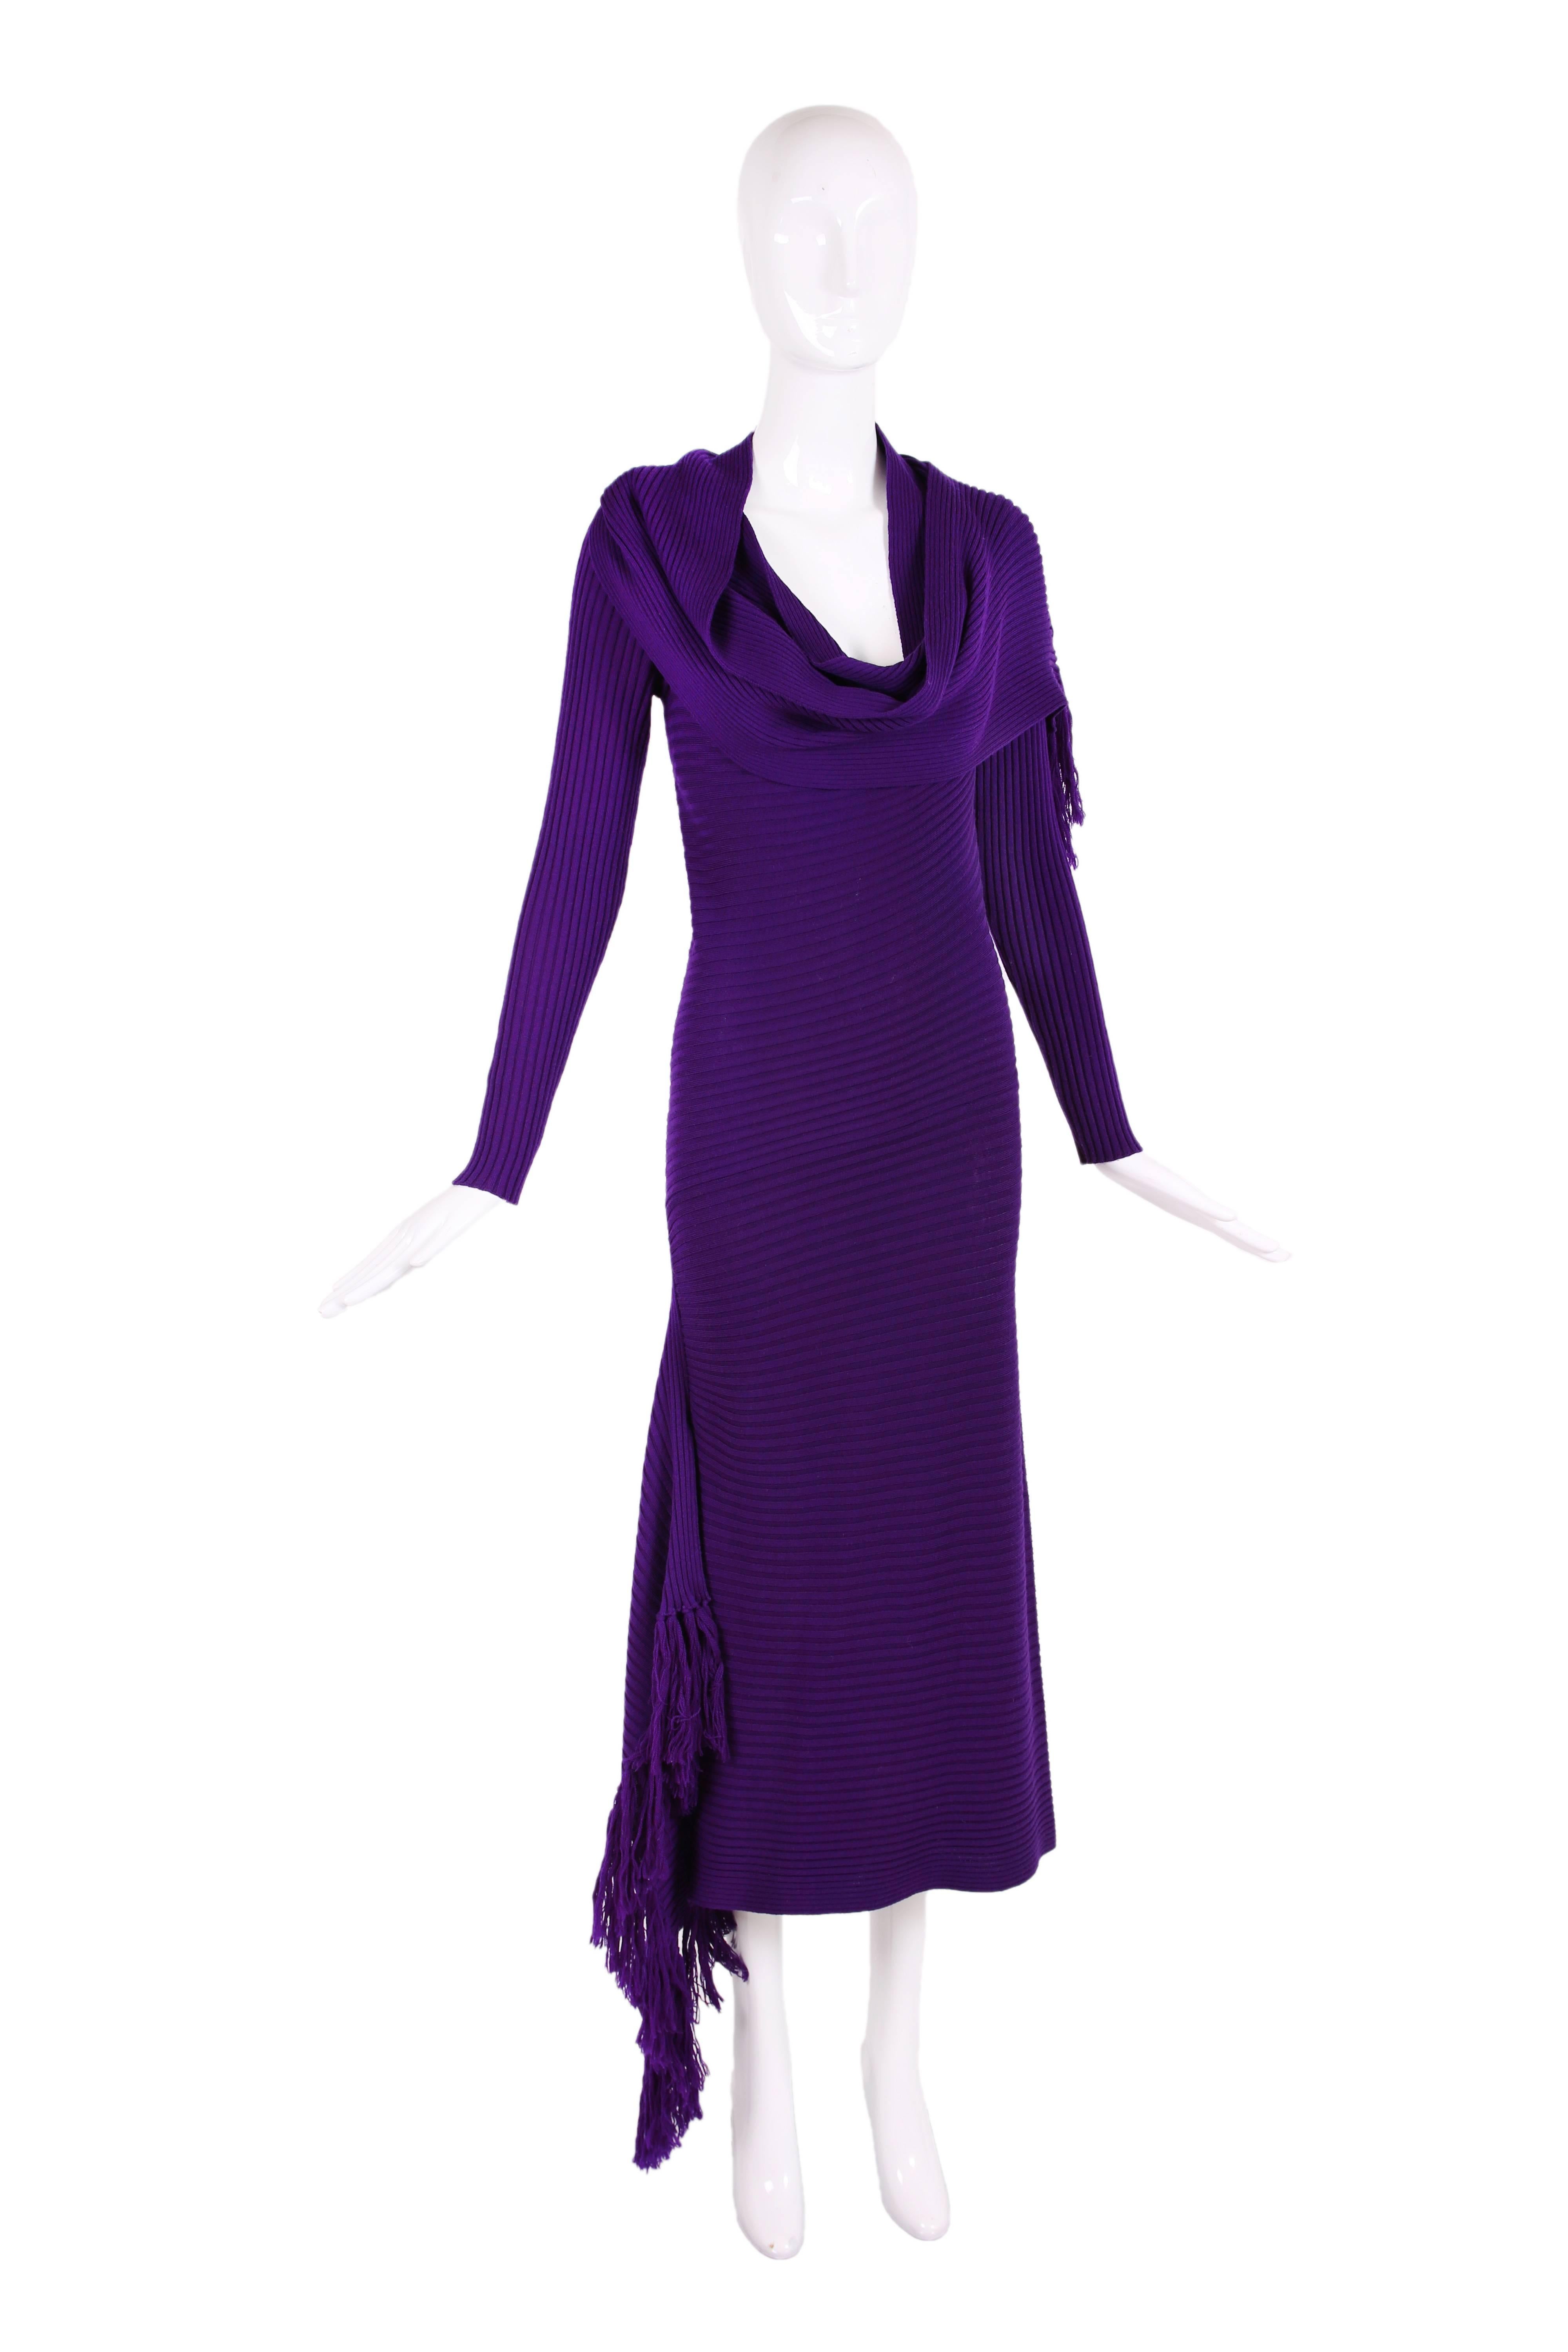 Jean Paul Gaultier deep purple ribbed knit bodycon dress w/fringed side slit, asymmetric hem and attached scarf w/fringe that can wrap multiple ways at the neck. In excellent condition. Size SMALL - please consult